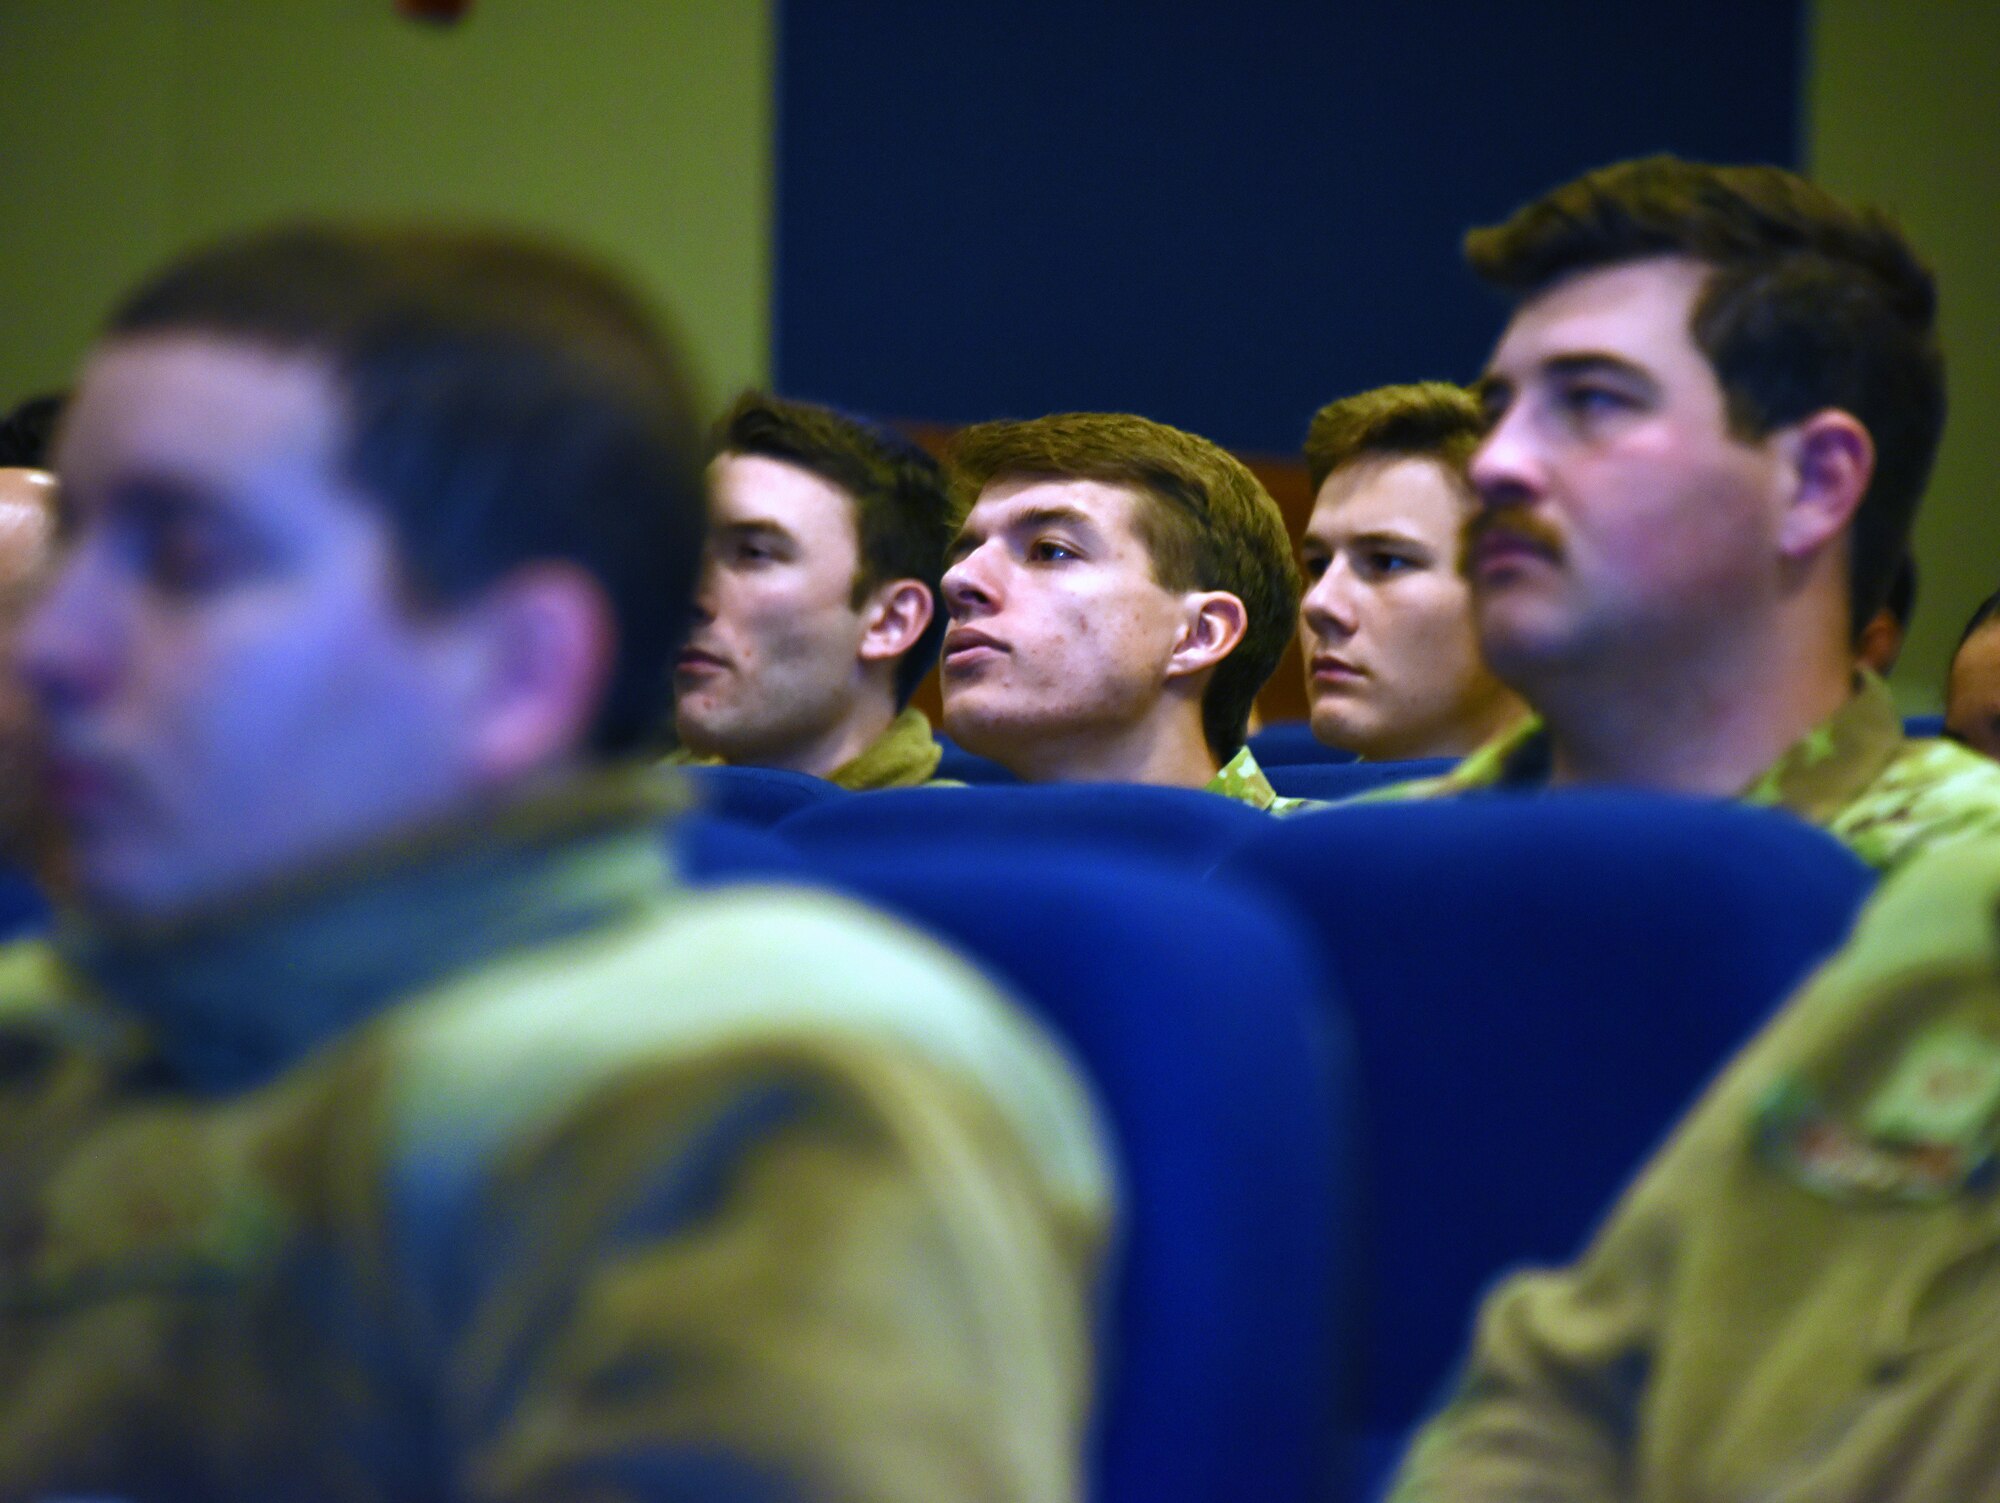 Airmen listen to a speaker giving a lecture at the symposium.